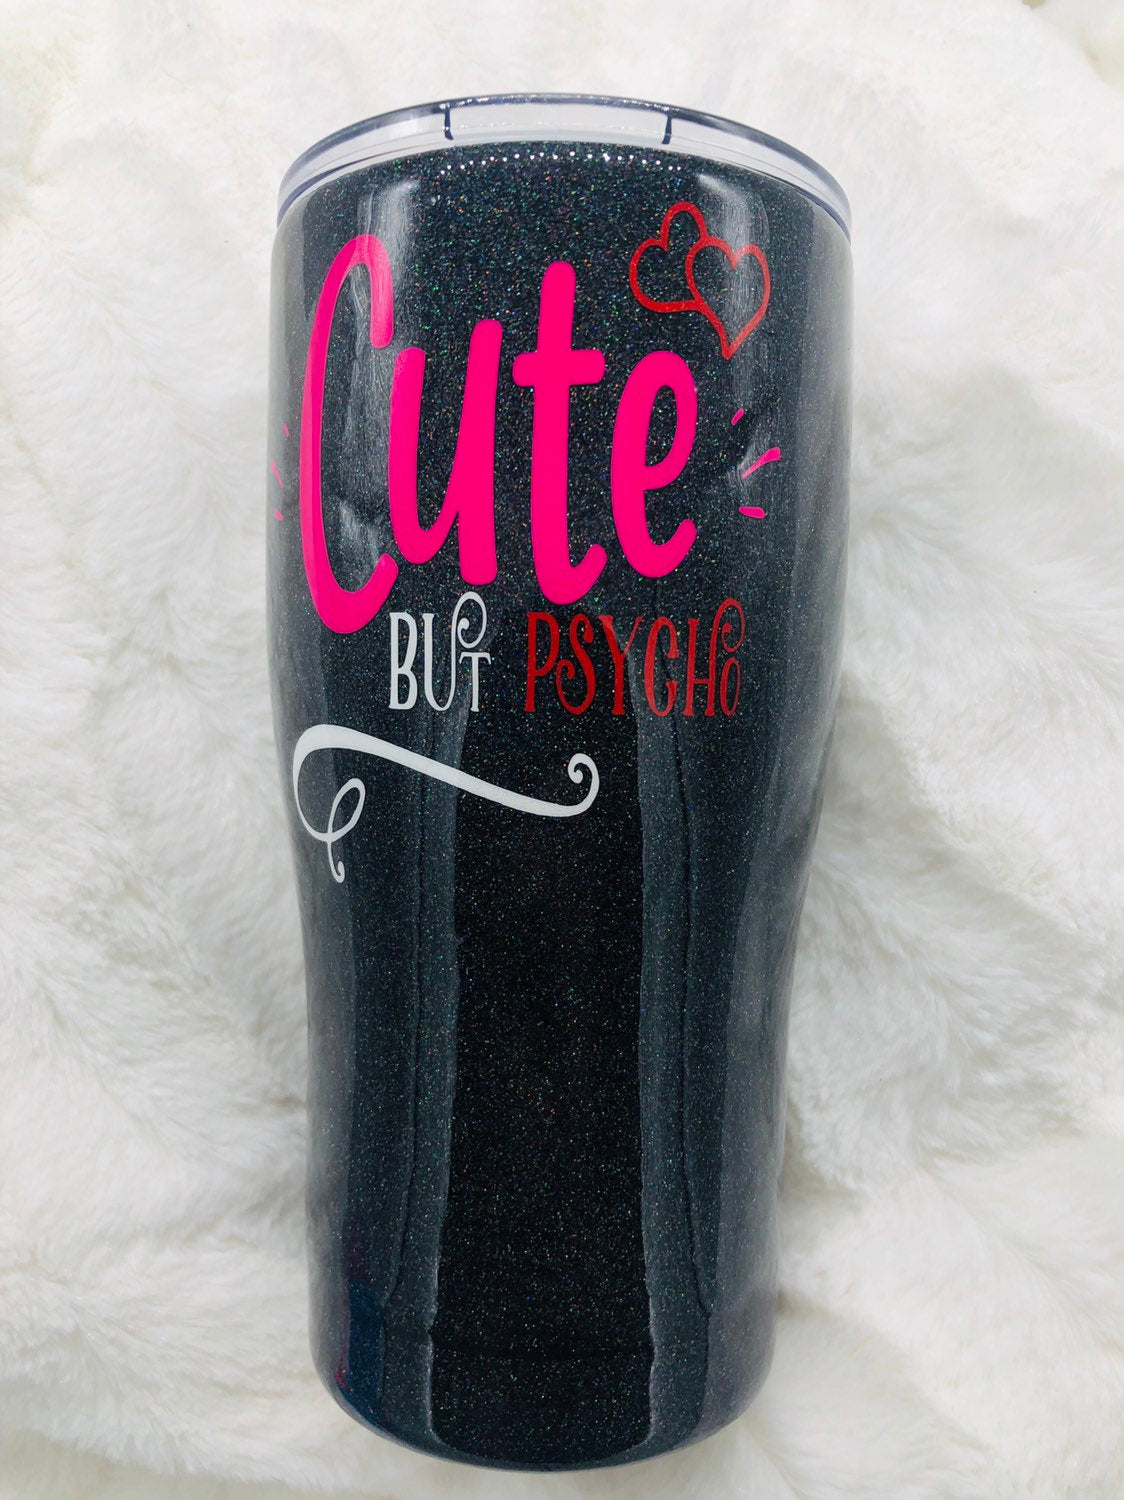 Glitter, Glitter Cup, Glitter Tumbler, Tumbler, Cute But Psycho, Black Cup, Black Glitter, Coffee Cup, Pink Tumbler, Personalized Cup, Gift